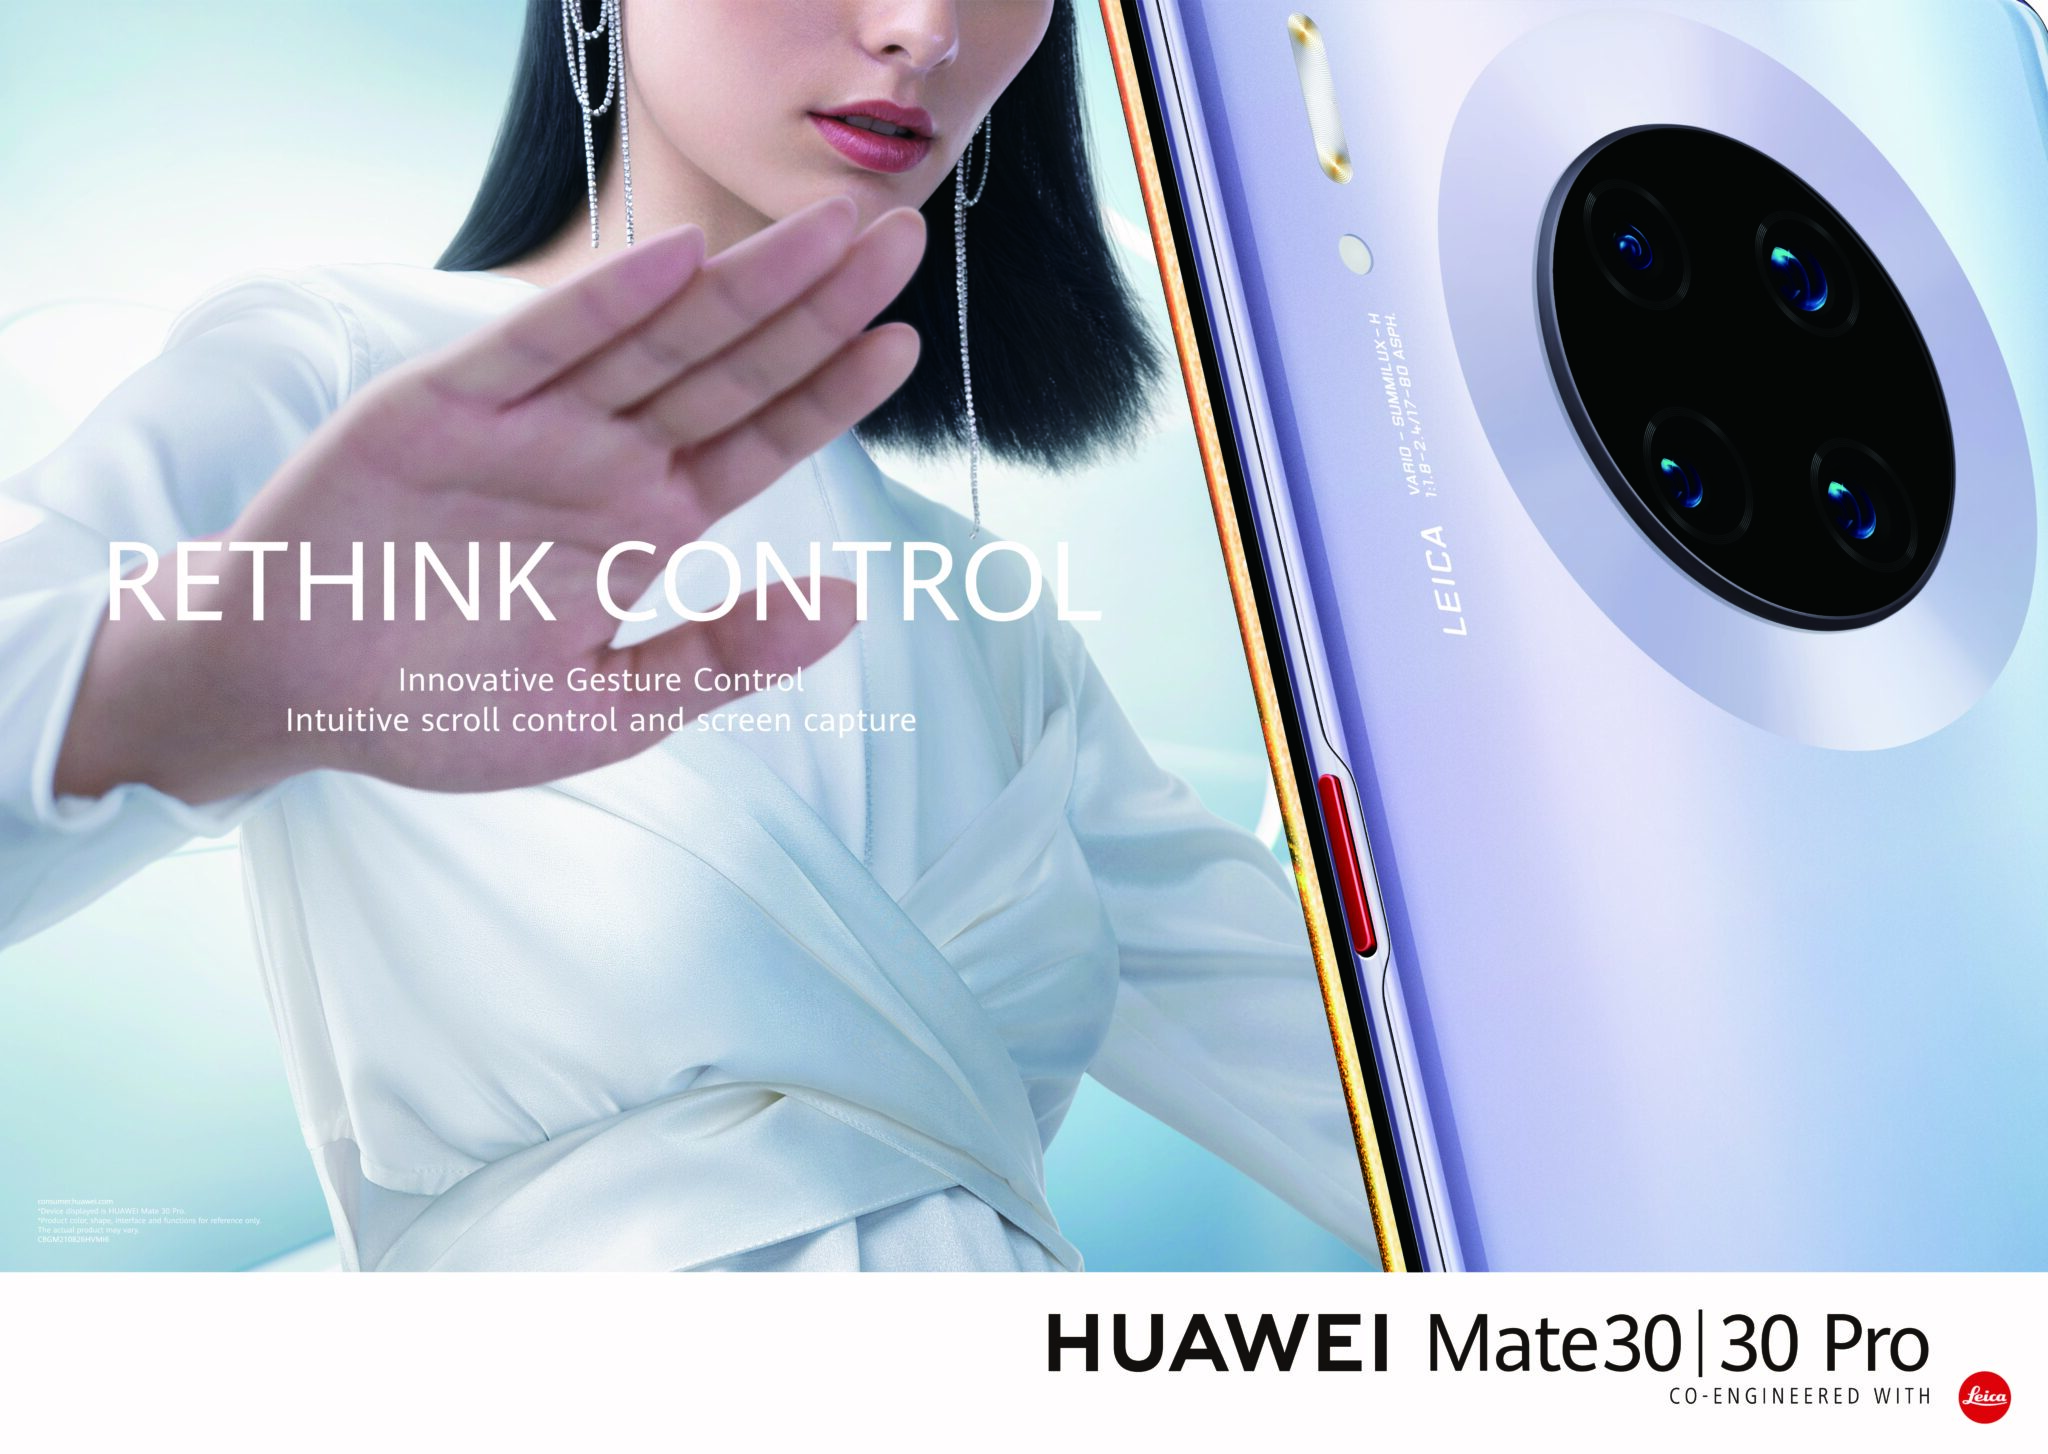 Huawei Smart Life with Air Gestures on Mate30 Pro